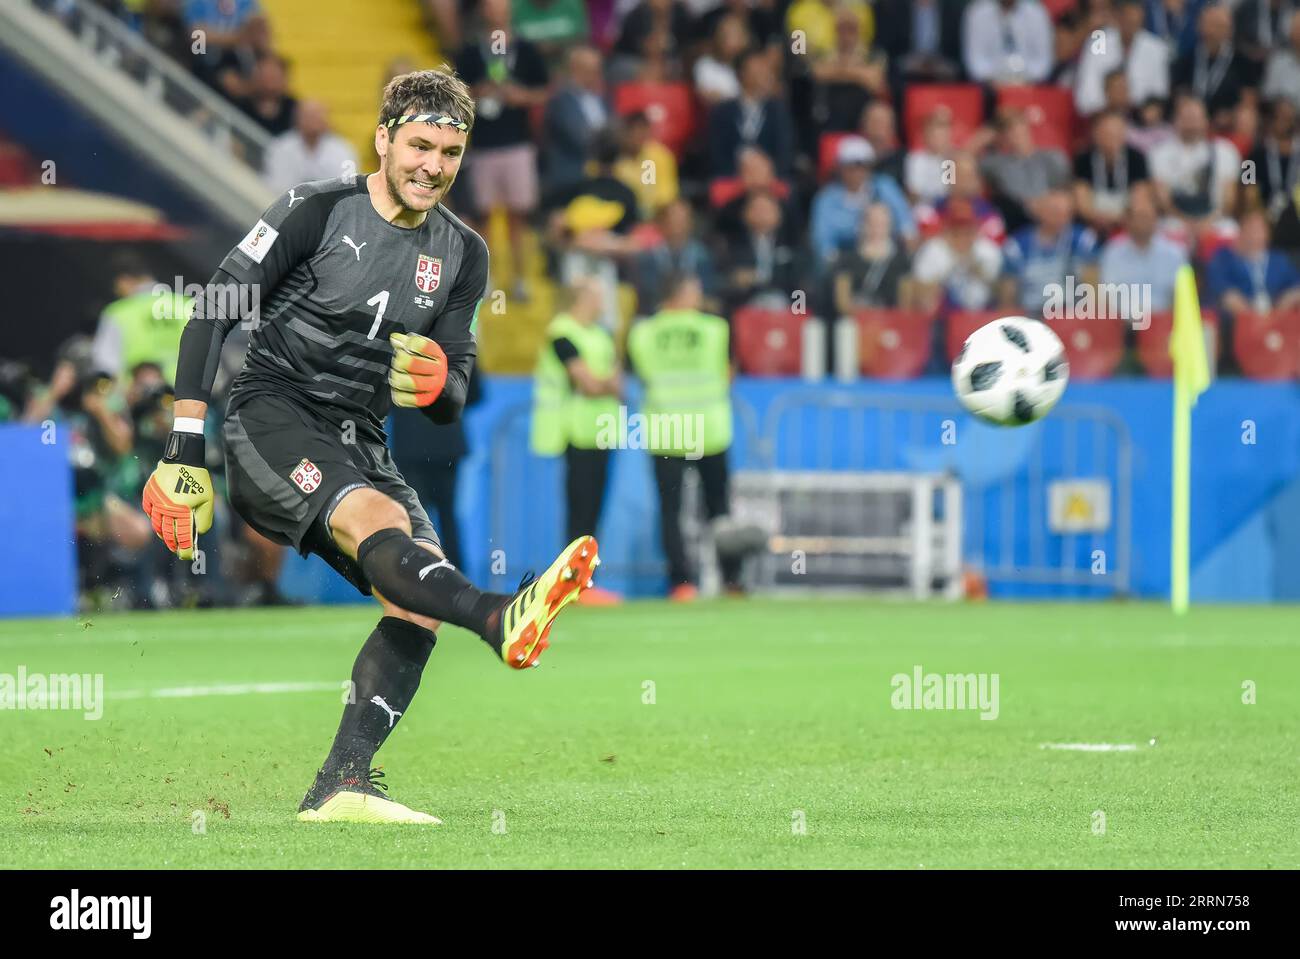 Moscow, Russia - June 27, 2018. Serbia national team goalkeeper Vladimir Stojkovic during FIFA World Cup 2018 match Serbia vs Brazil (0-2) Stock Photo